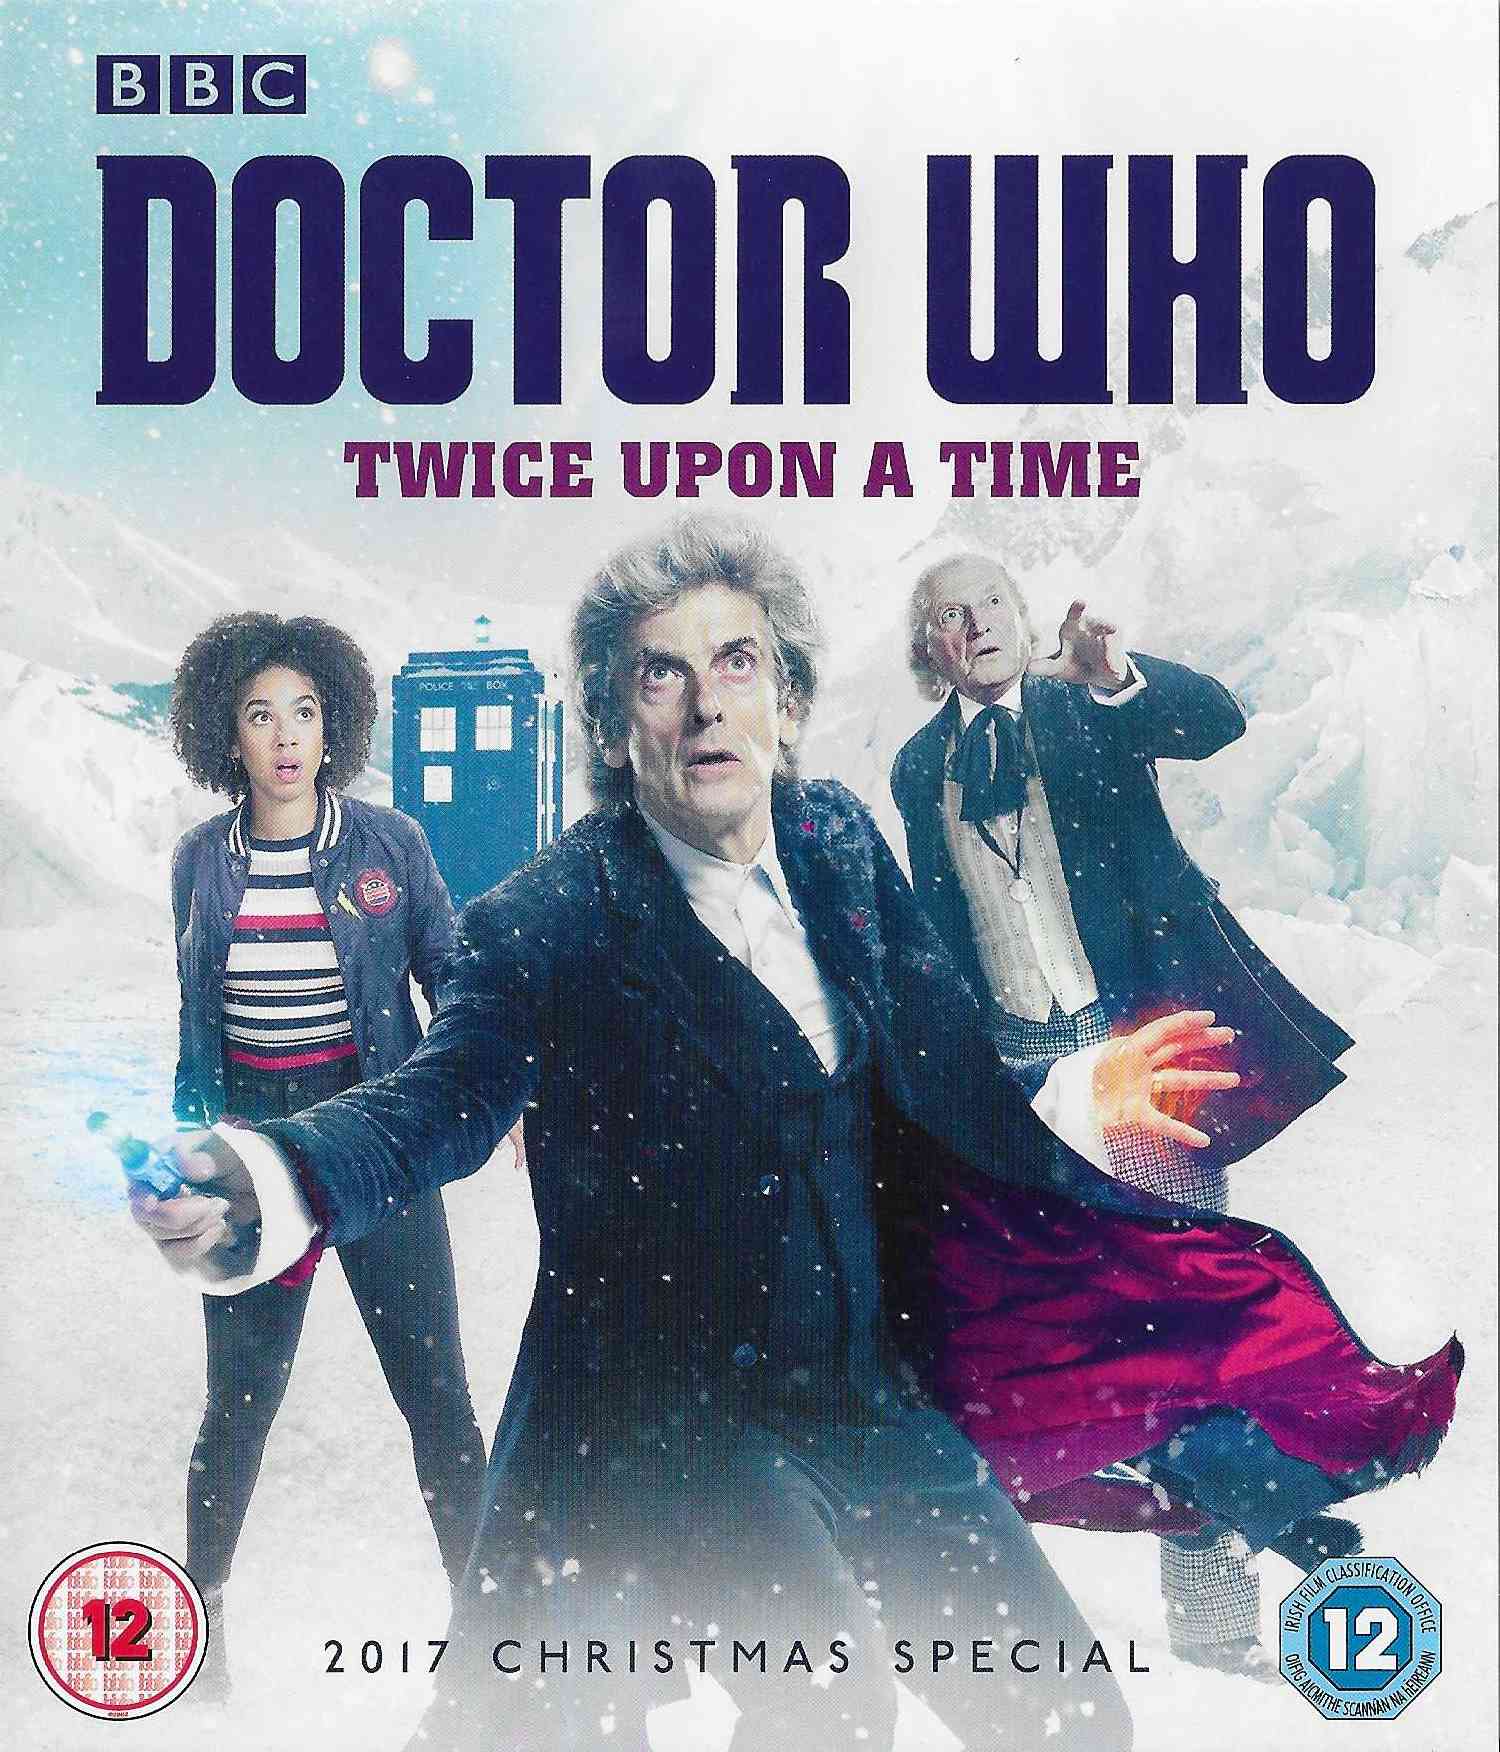 Picture of Doctor Who - Twice upon a time by artist Stevet Moffat from the BBC 4k_ultrahd - Records and Tapes library